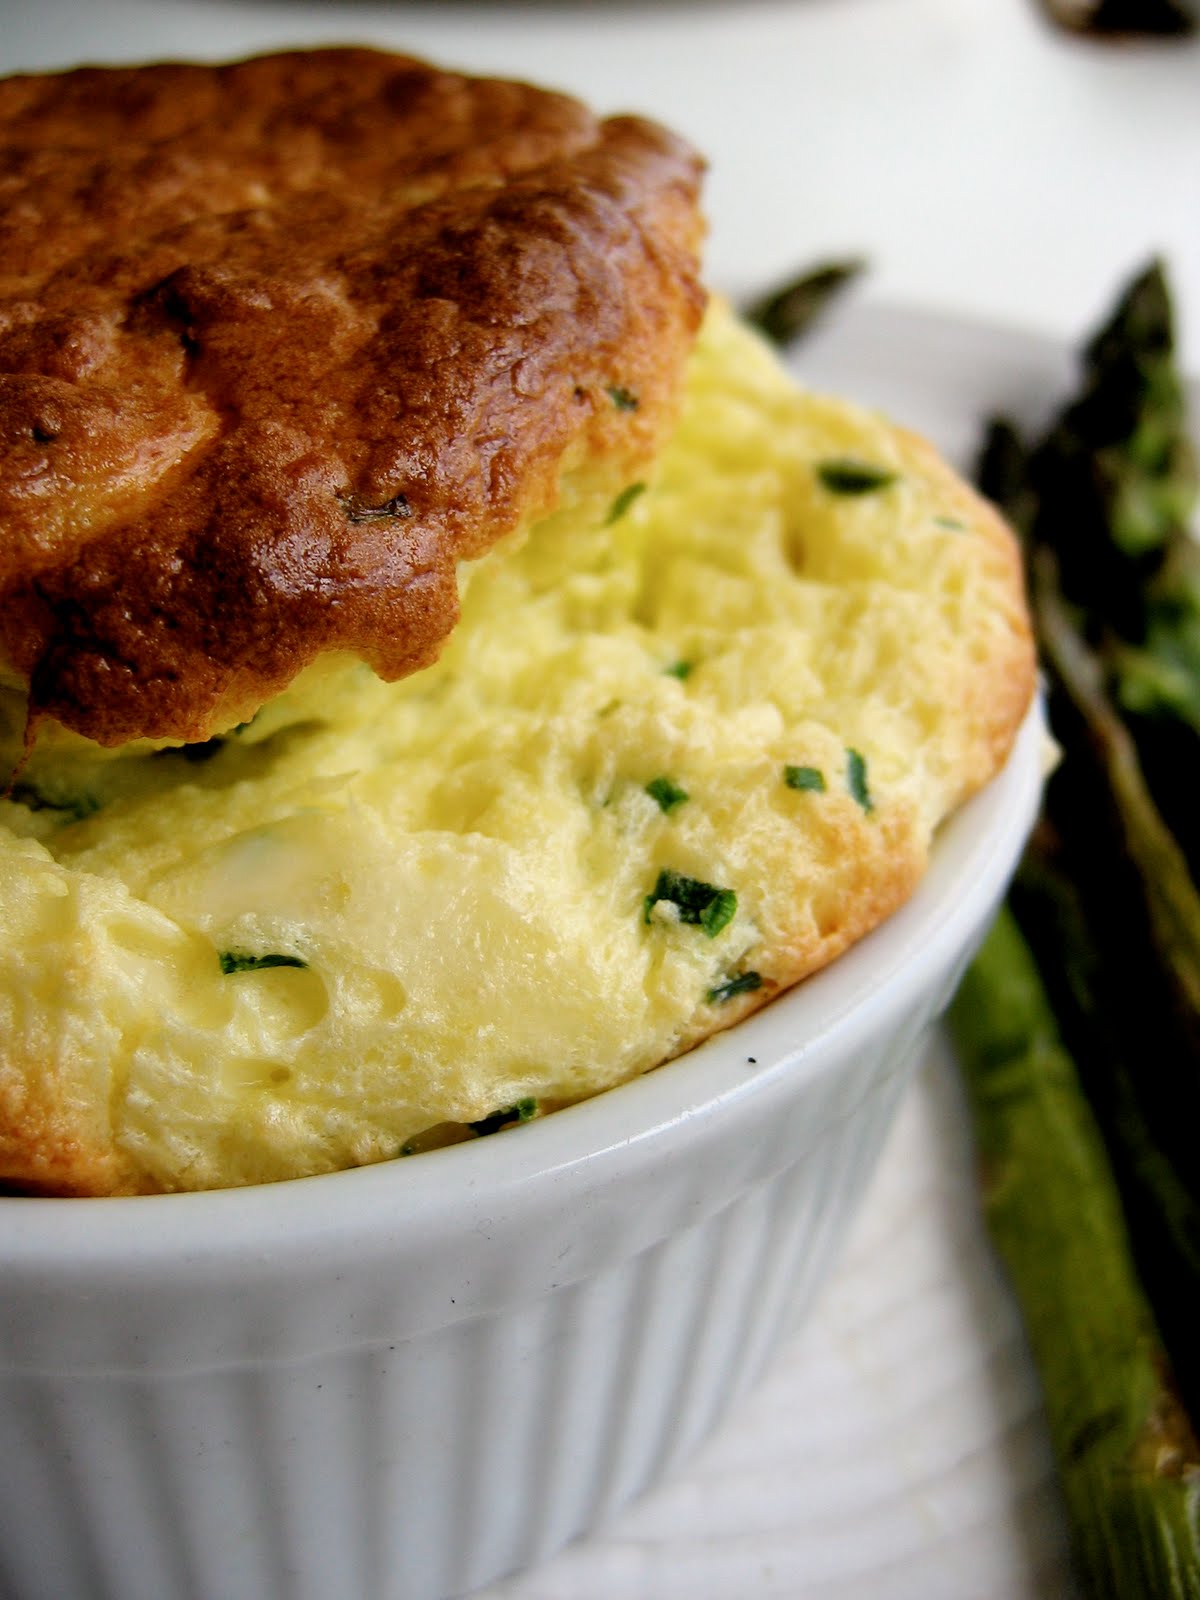 Green Garlic, Chive and Cheese Souffles with Roasted Asparagus